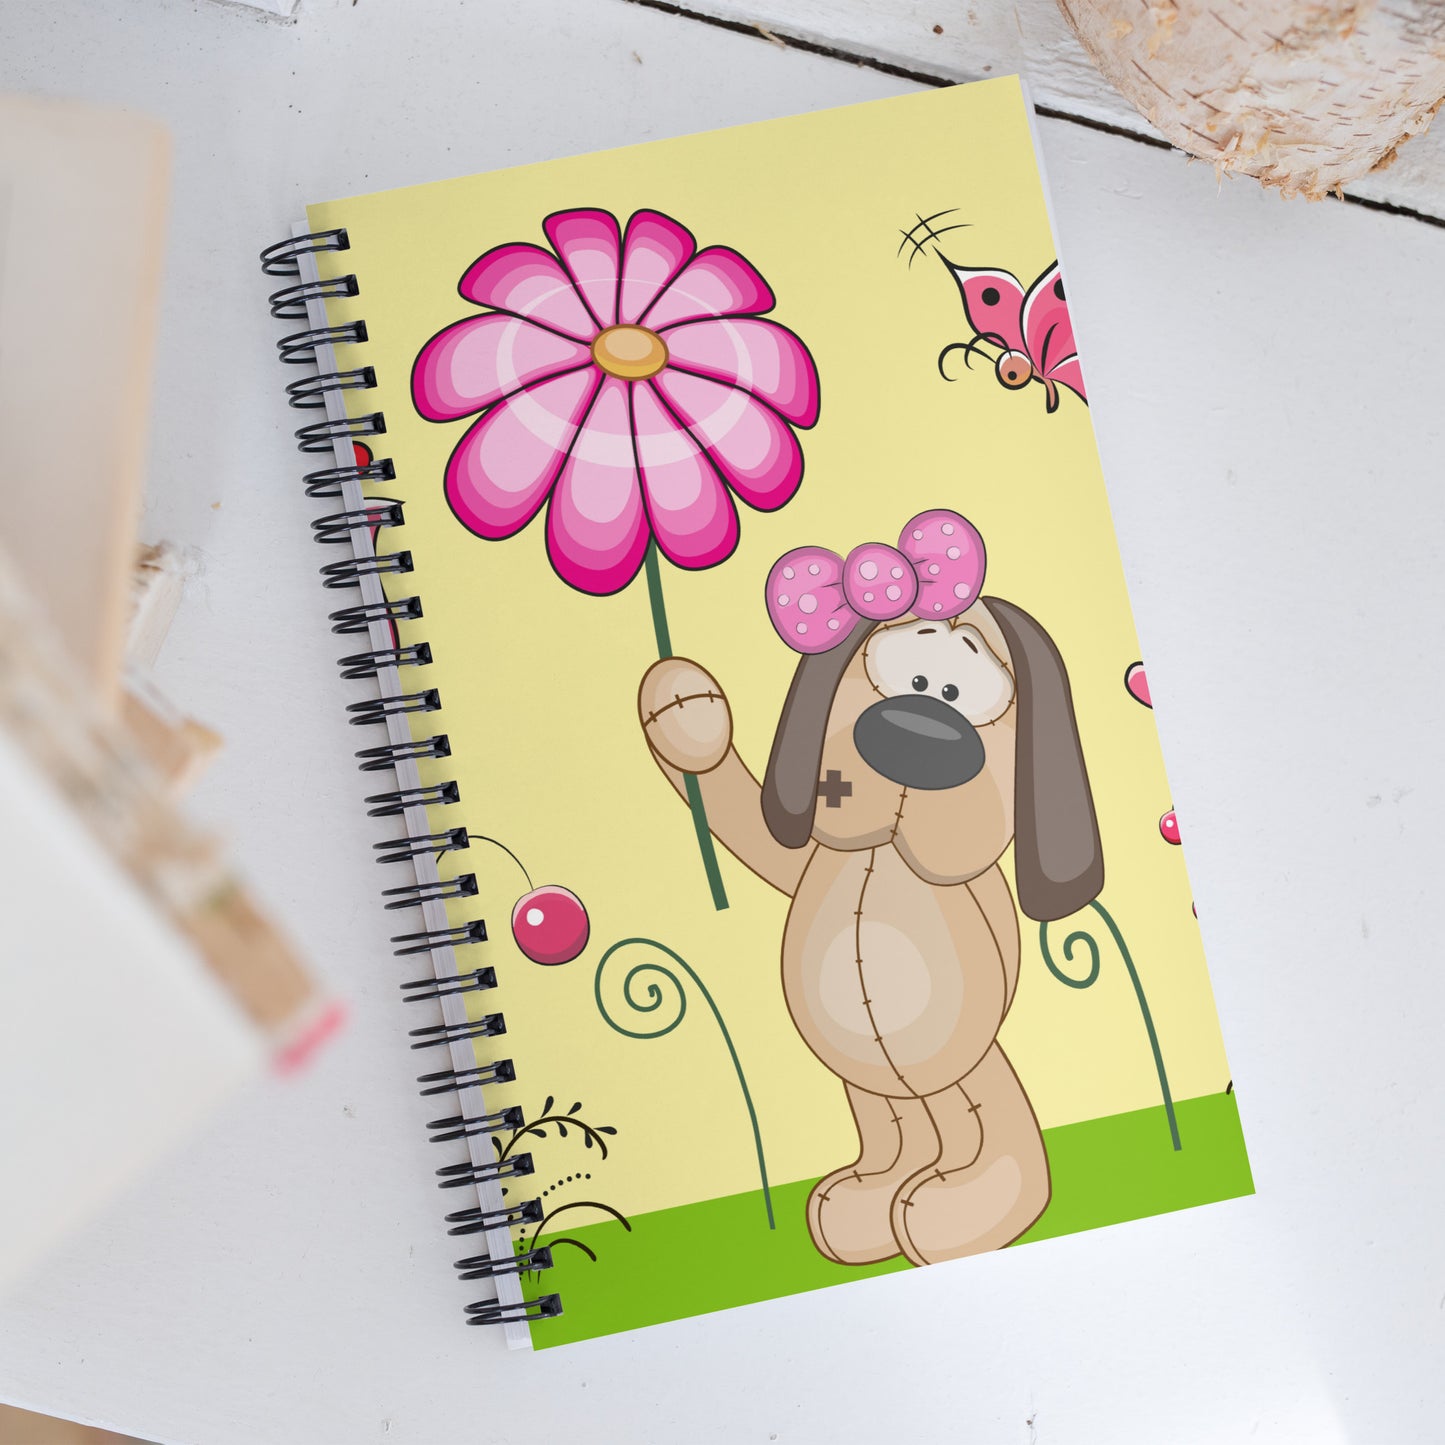 Doggy Love Flowers Spiral notebook